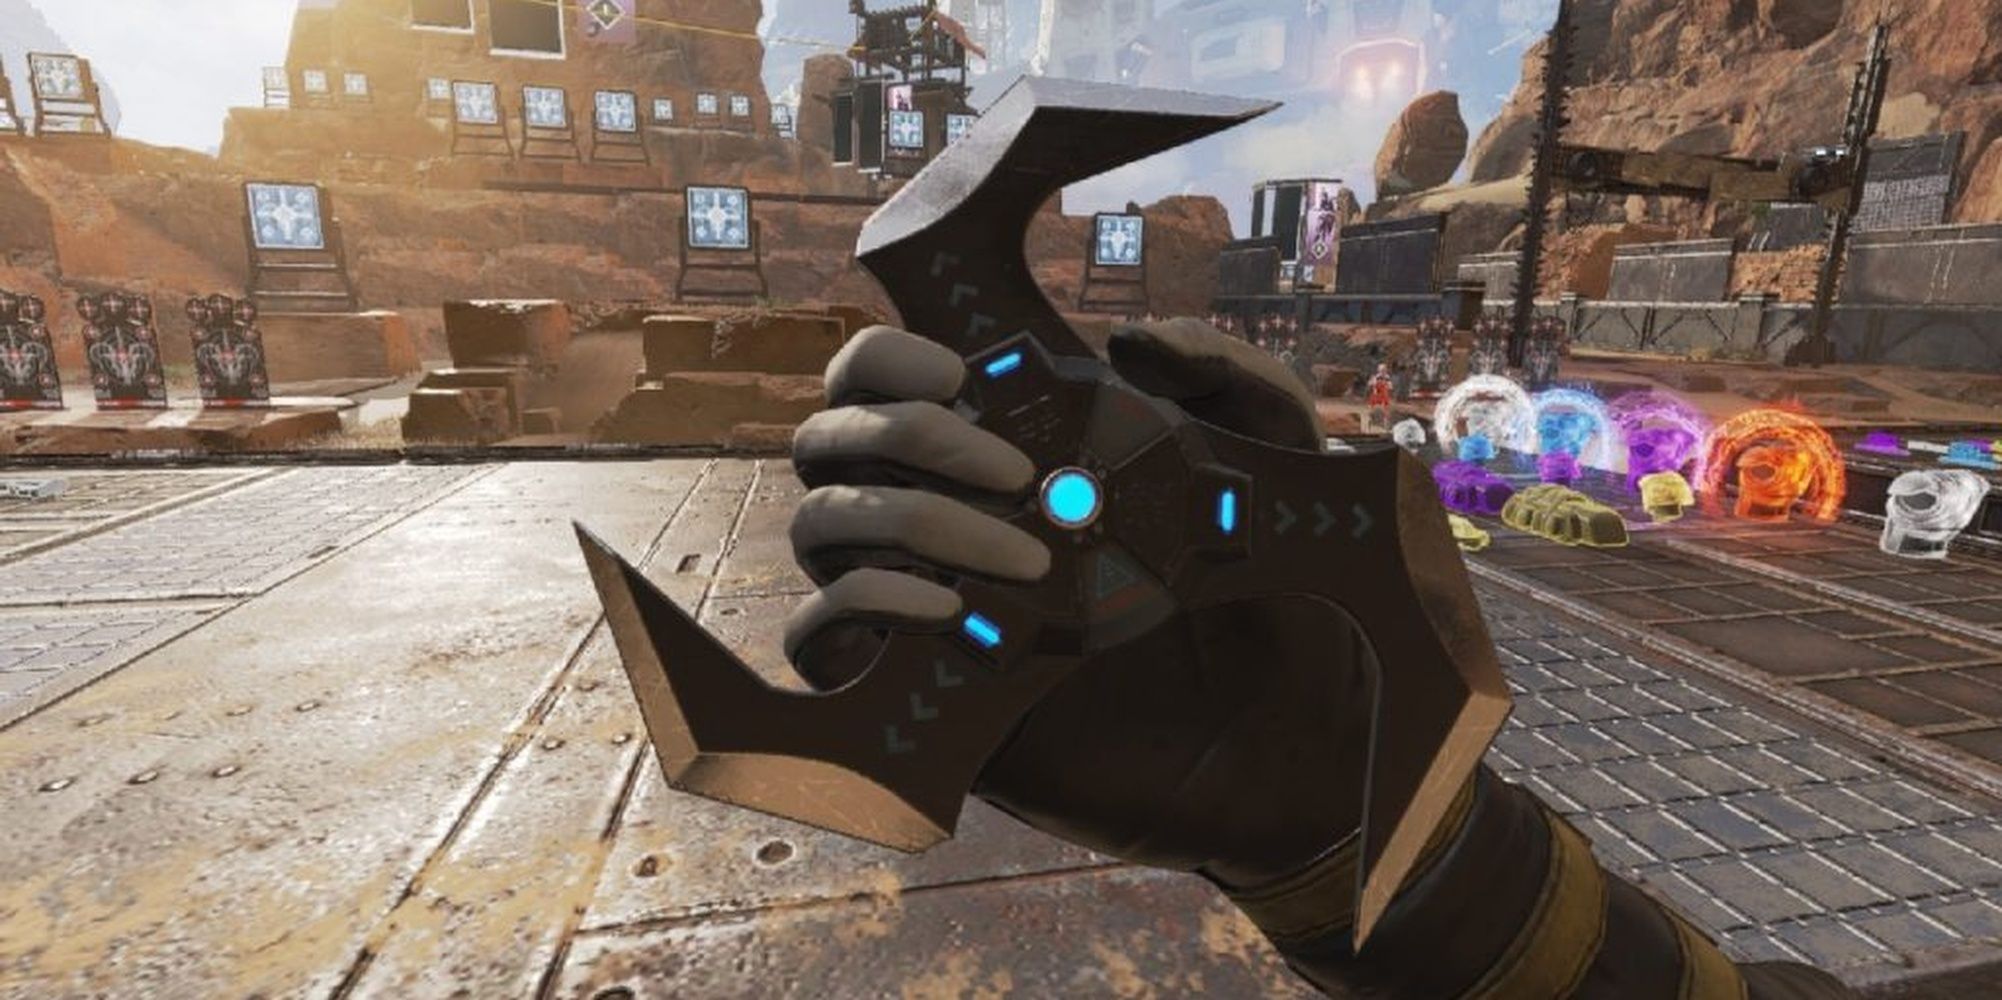 A character with a bow star in Apex Legends